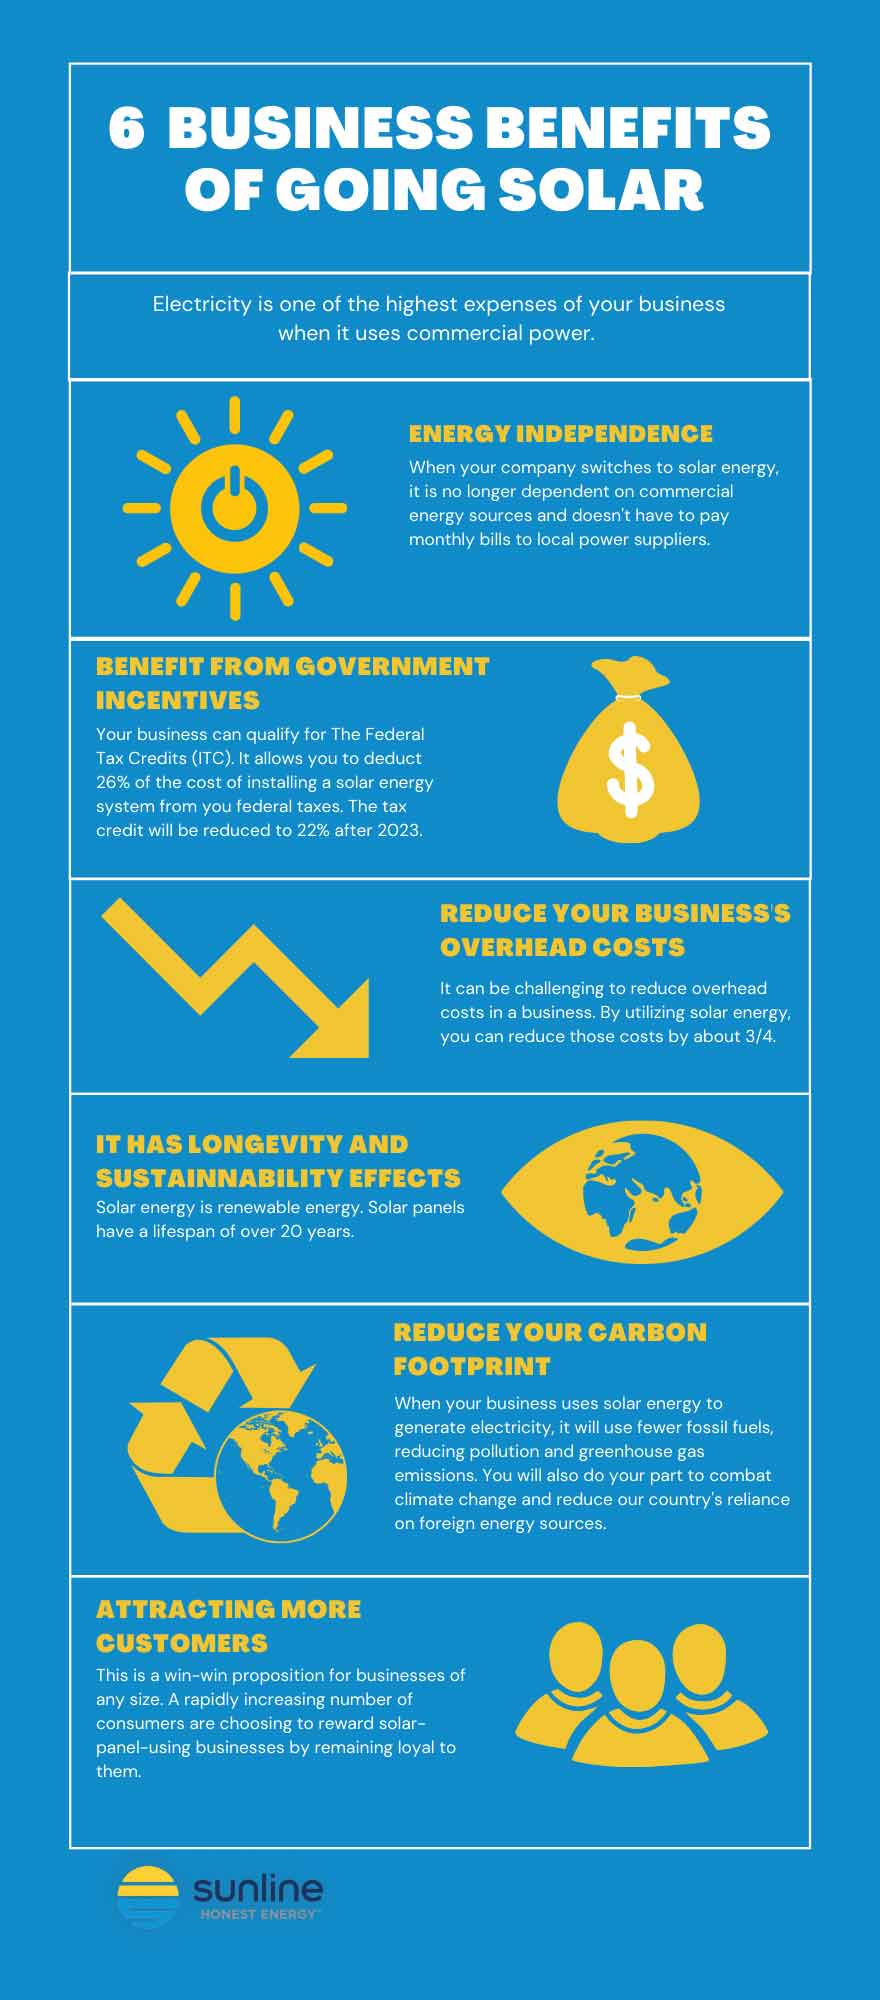 6BusinessBenefitsofGoingSolar Infographic, Industry Today